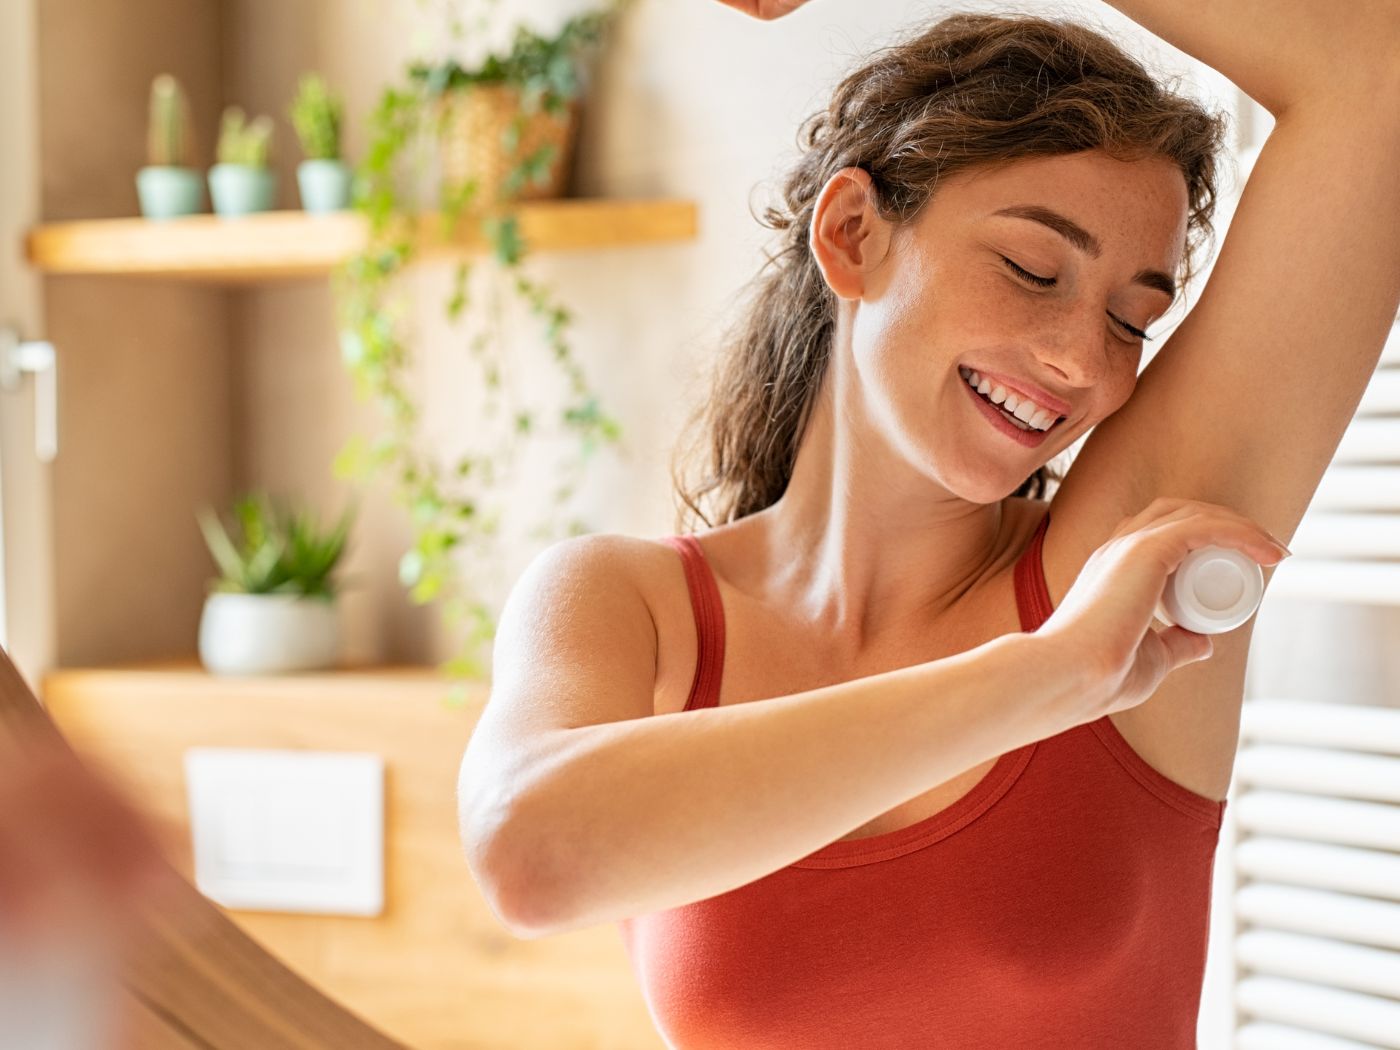 You Need To Add An Underarm Roll-on Deodorant To Your Everyday Routine. Here's Why!